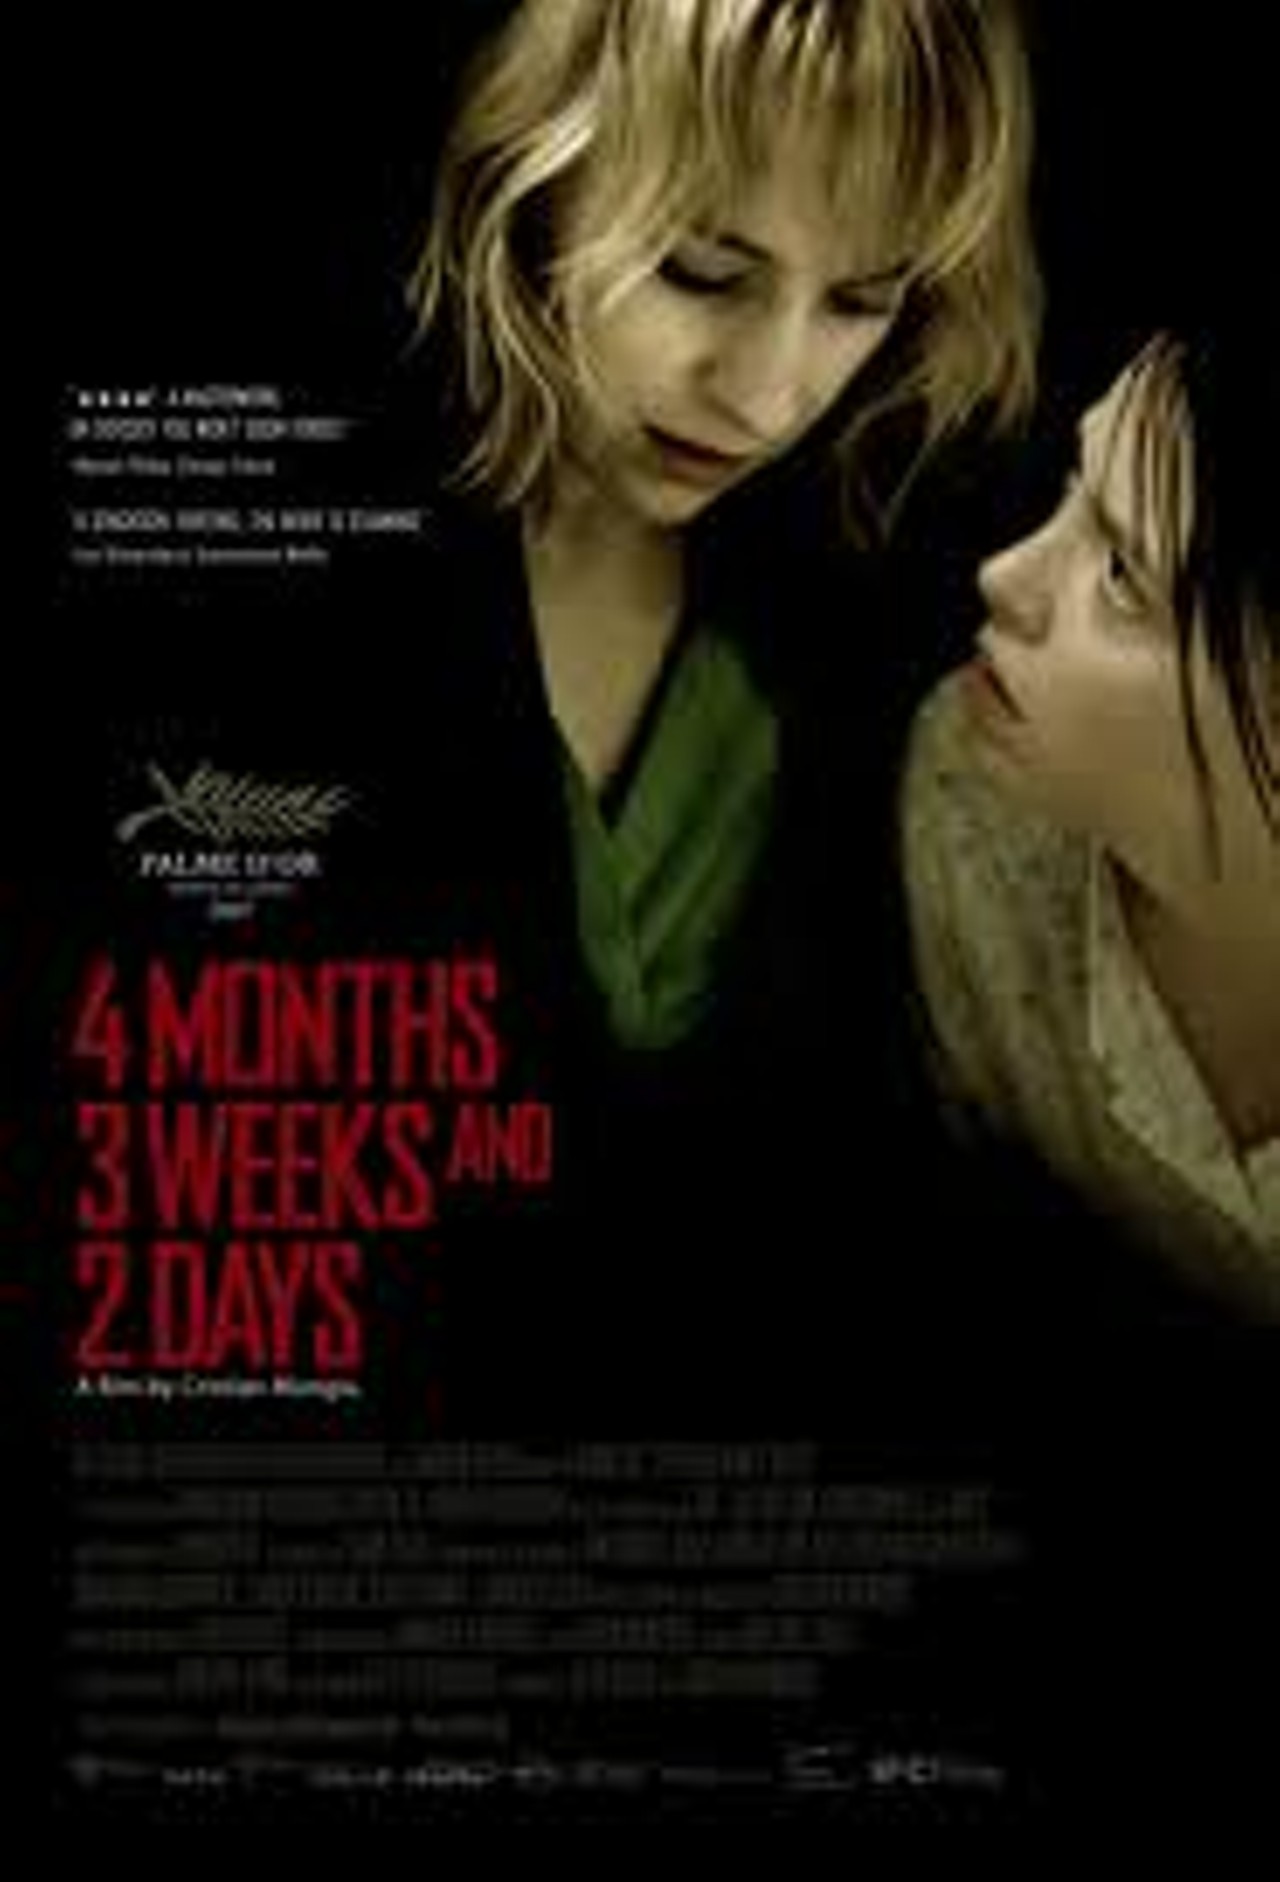 Not exactly "fun for the whole family," this bleak Romanian drama about abortion which took top honors at the Cannes Film Festival in 2007 remains one of the most celebrated films of the past decade. 4 Months, 3 Weeks And 2 Days follows two college rooommates as they arrange an illegal abortion in 1980s communist Romania. Can you spell F-U-N? The significance of the title only becomes apparent halfway through the film, but it has some gruesome ramifications, far as the operation is concerned.  The film is sometimes somber to a fault -- welcome to the Balkans! -- but is nonetheless a triumph. It plays at the Cinematheque tonight at 5:15 and tomorrow at 9:30 as part of the Cultural Gardens Film Fest. (Sam Allard)